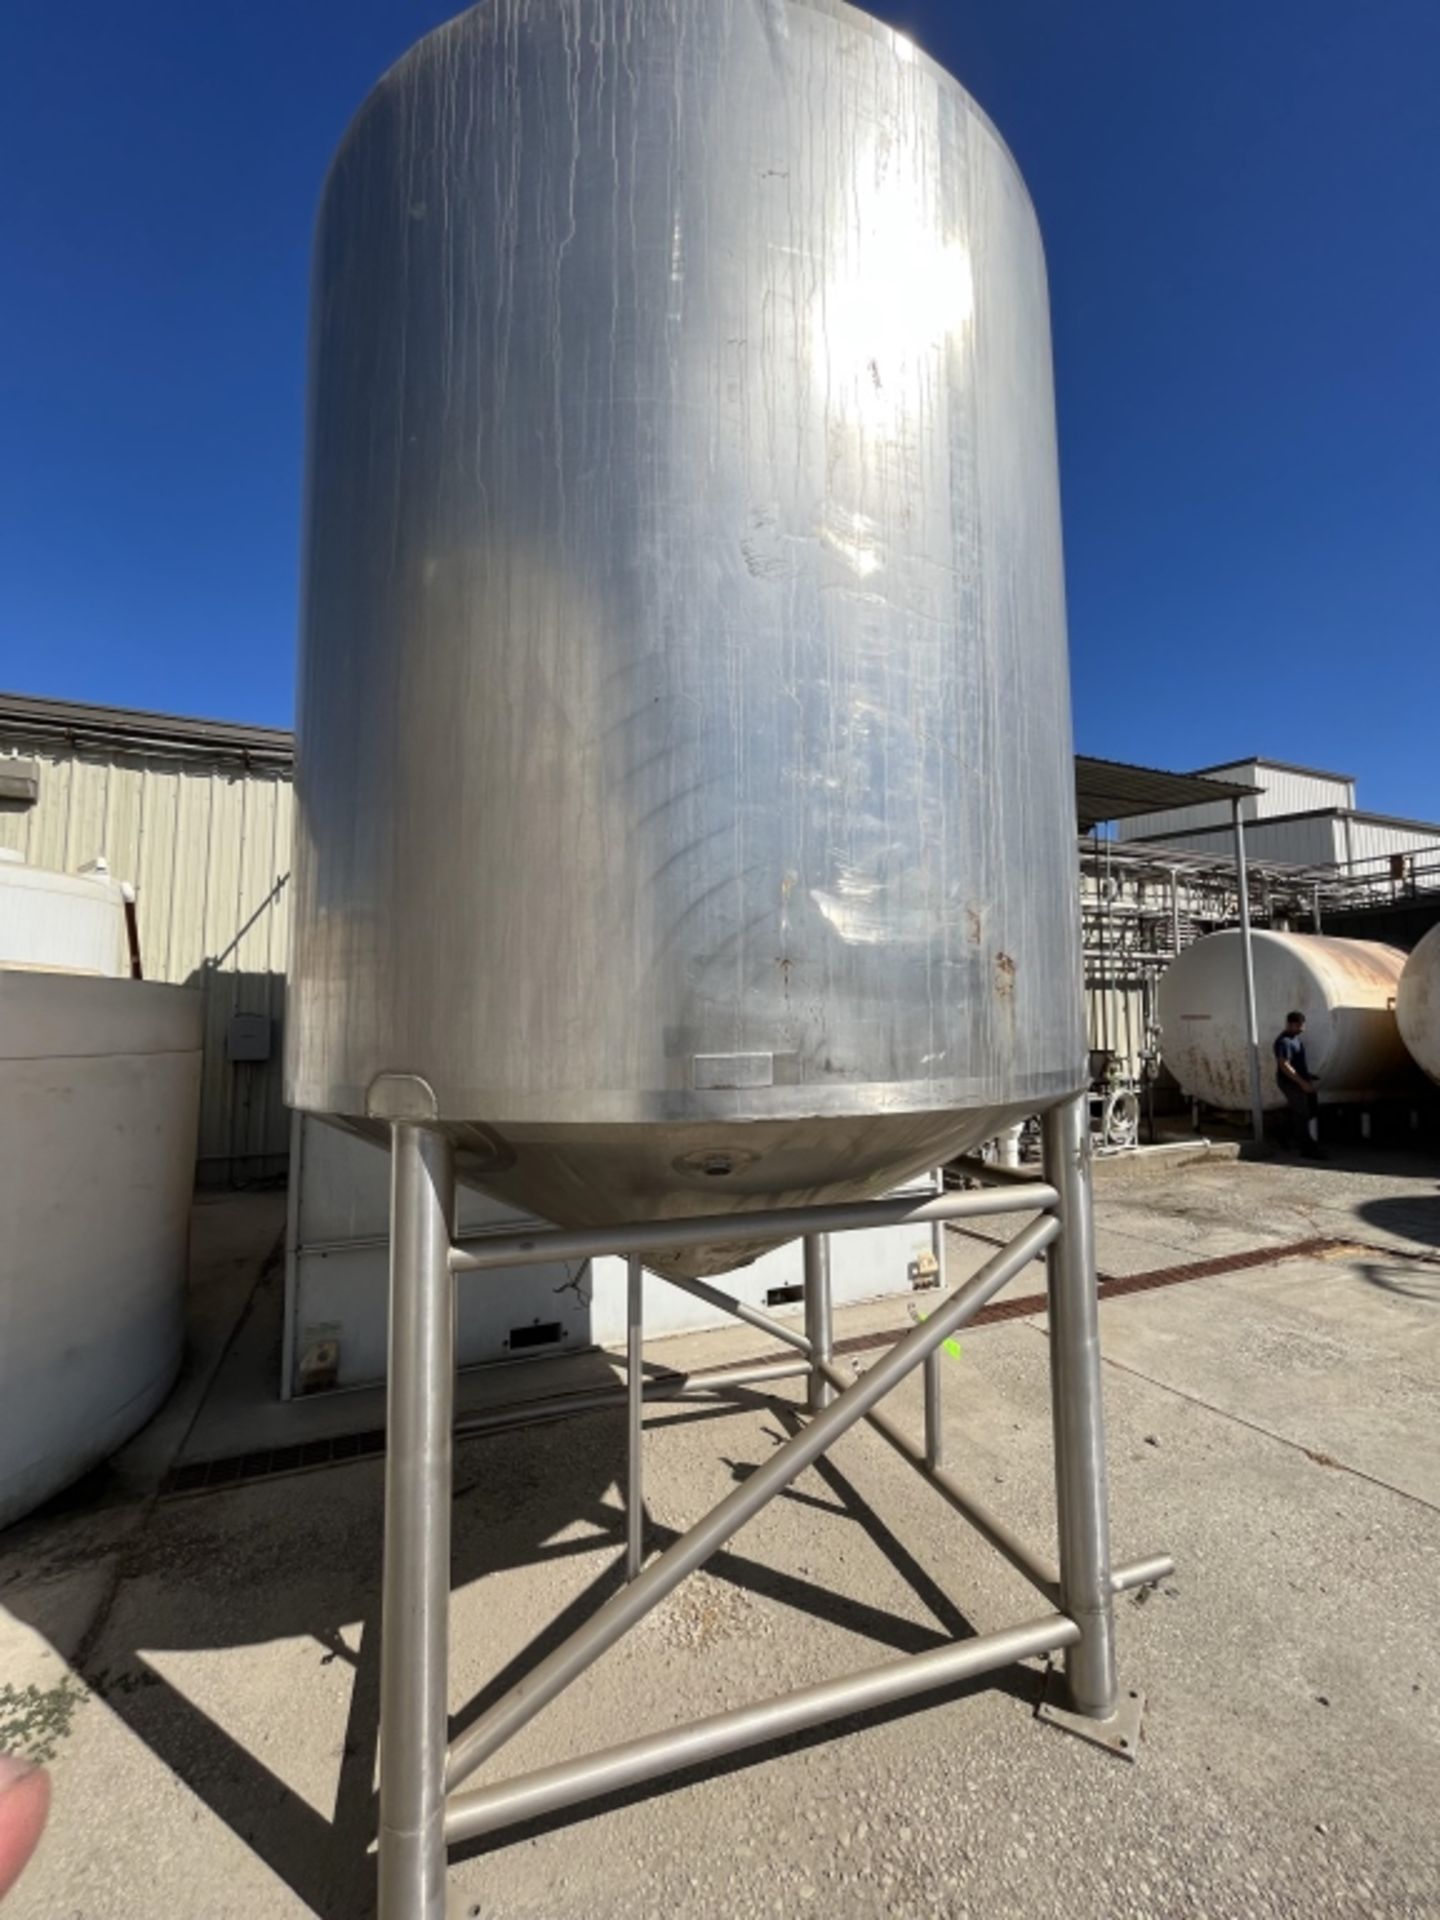 Sani-Fab Jacketed S/S Tank, Tank Dims.: Aprox. 7ft. Tall x 80” Dia., Cone Bottom, Mounted on S/S - Bild 2 aus 9